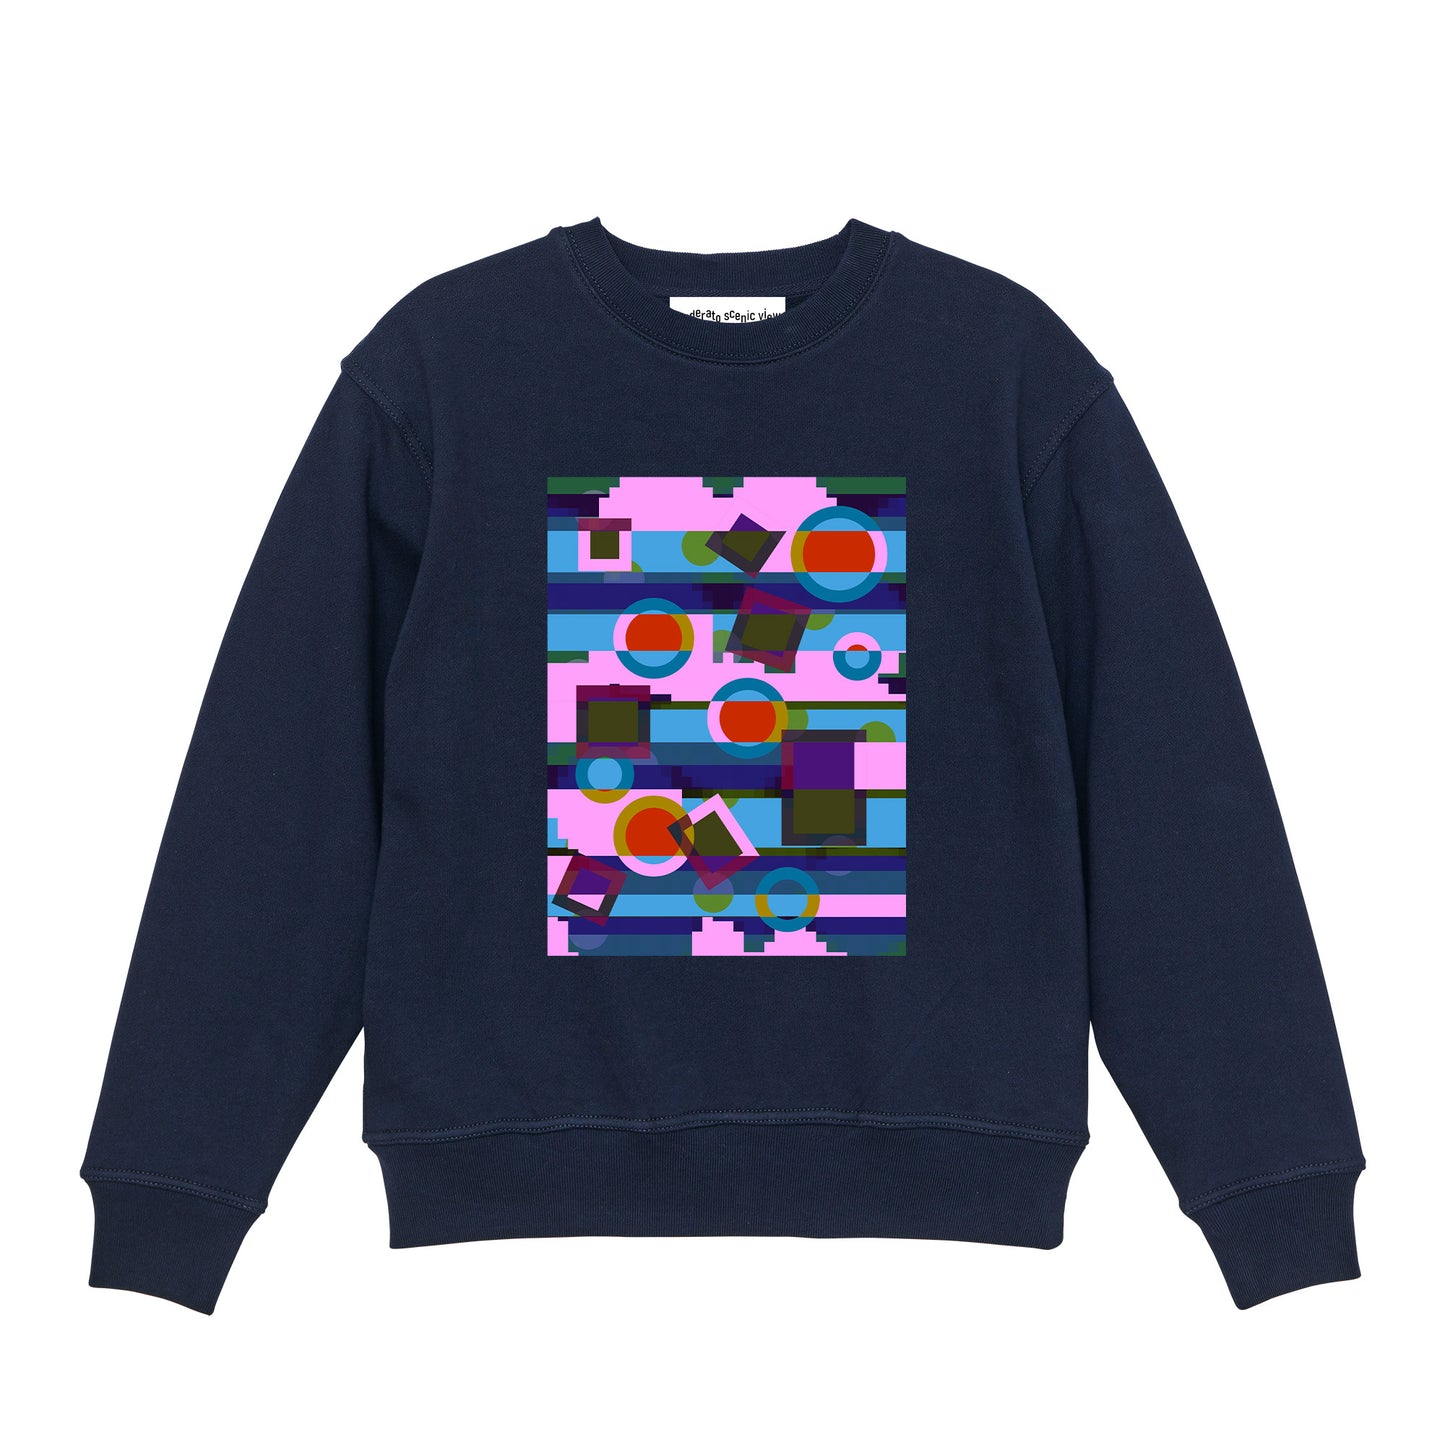 [moderato scenic view] Sweat Shirts [feis never hill]